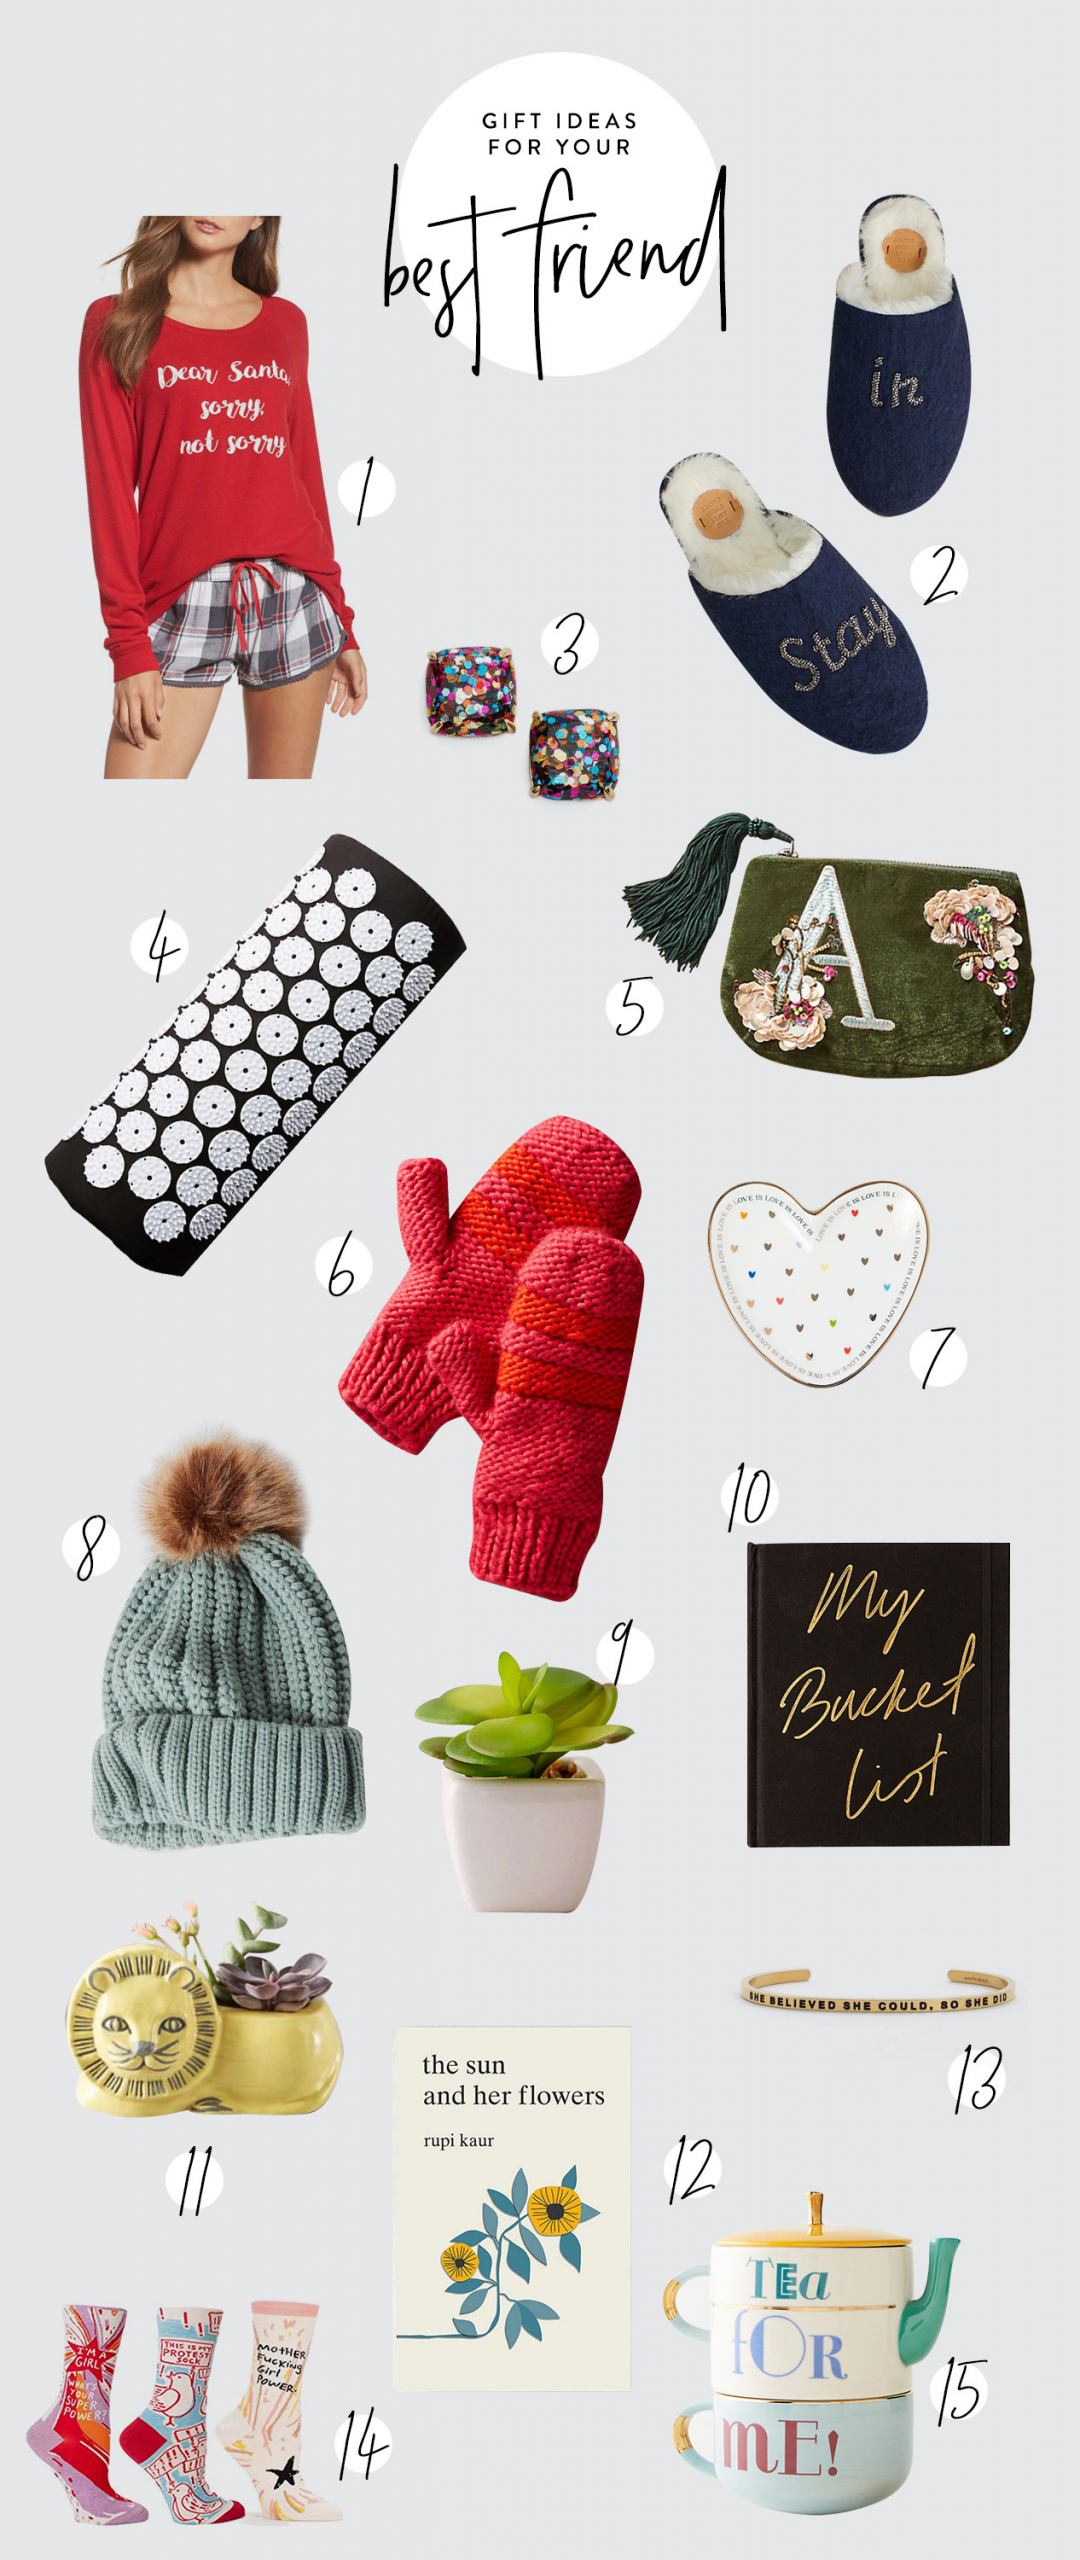 Christmas Gifts For Best Friend
 The Ultimate Guide for Holiday Gift Ideas